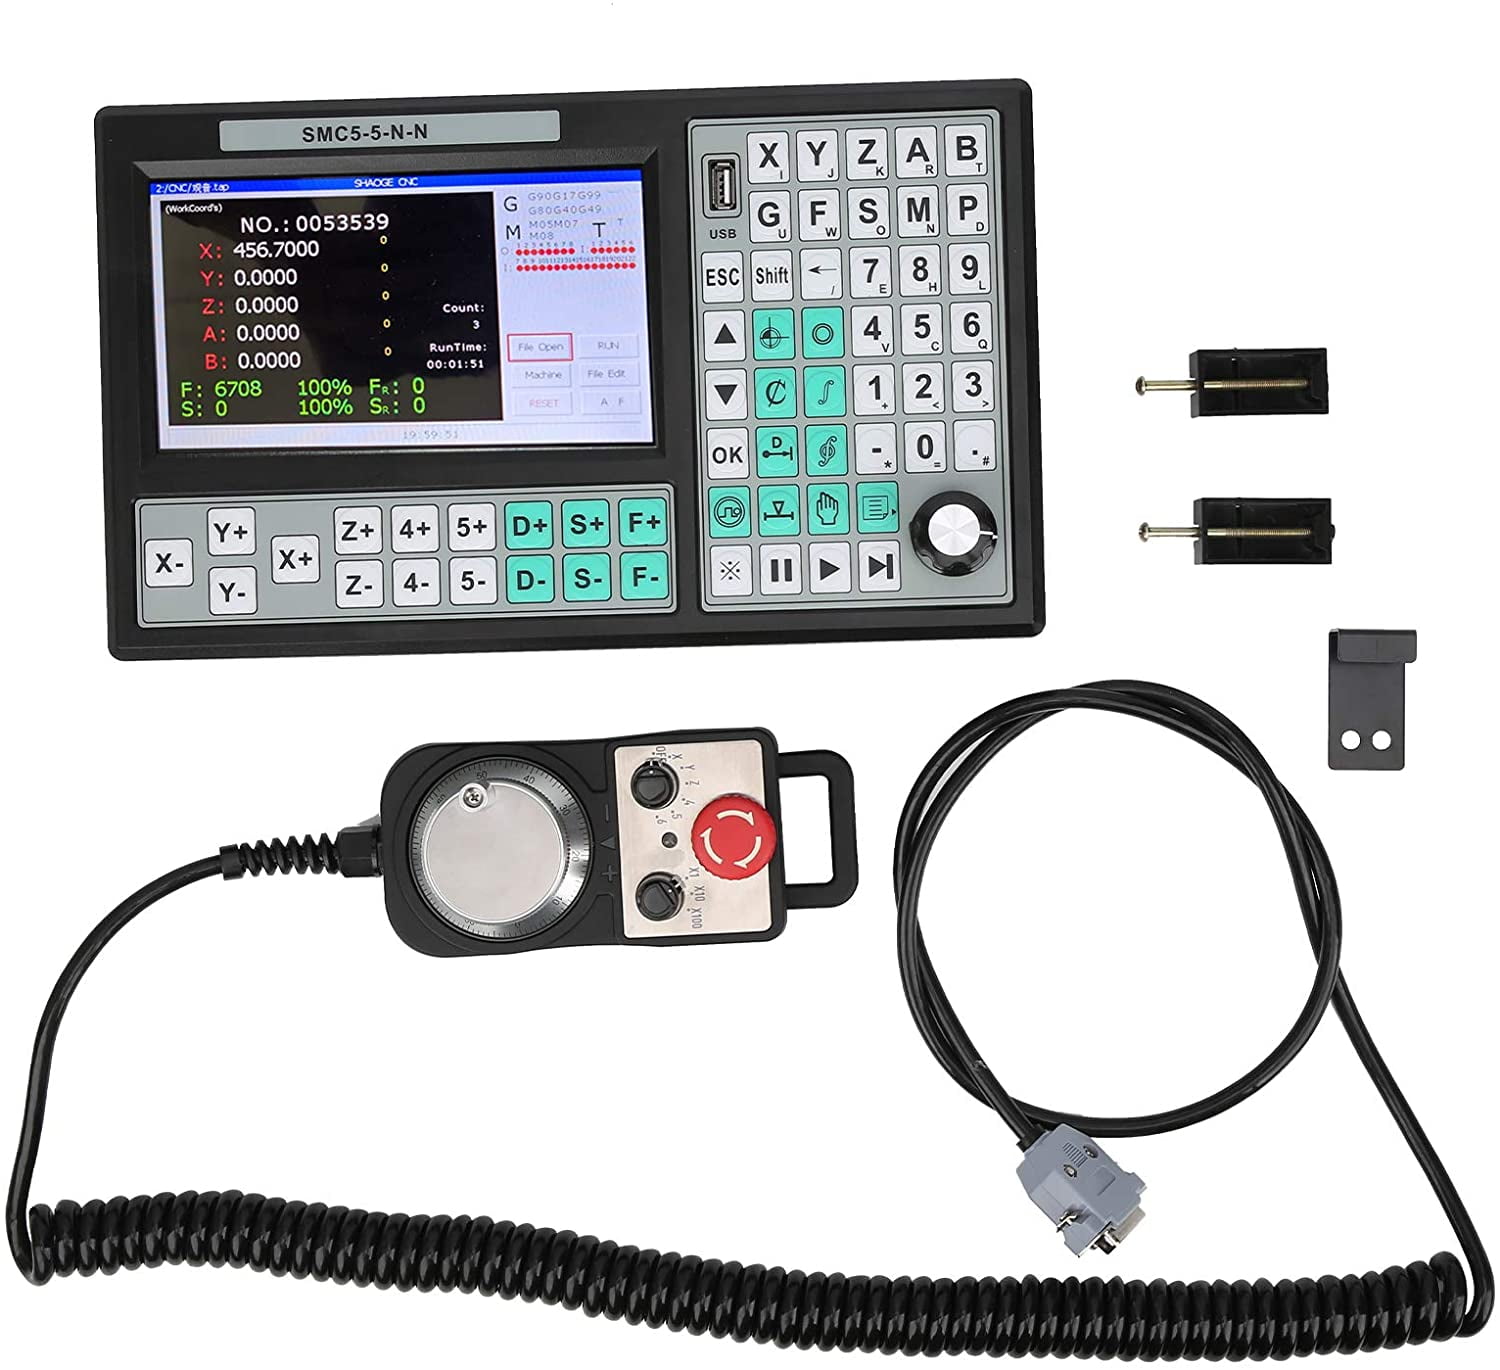 3 Axis DDCSV1.1 500KHz 3 Linkage Motion Offline Control System Controller G Code 